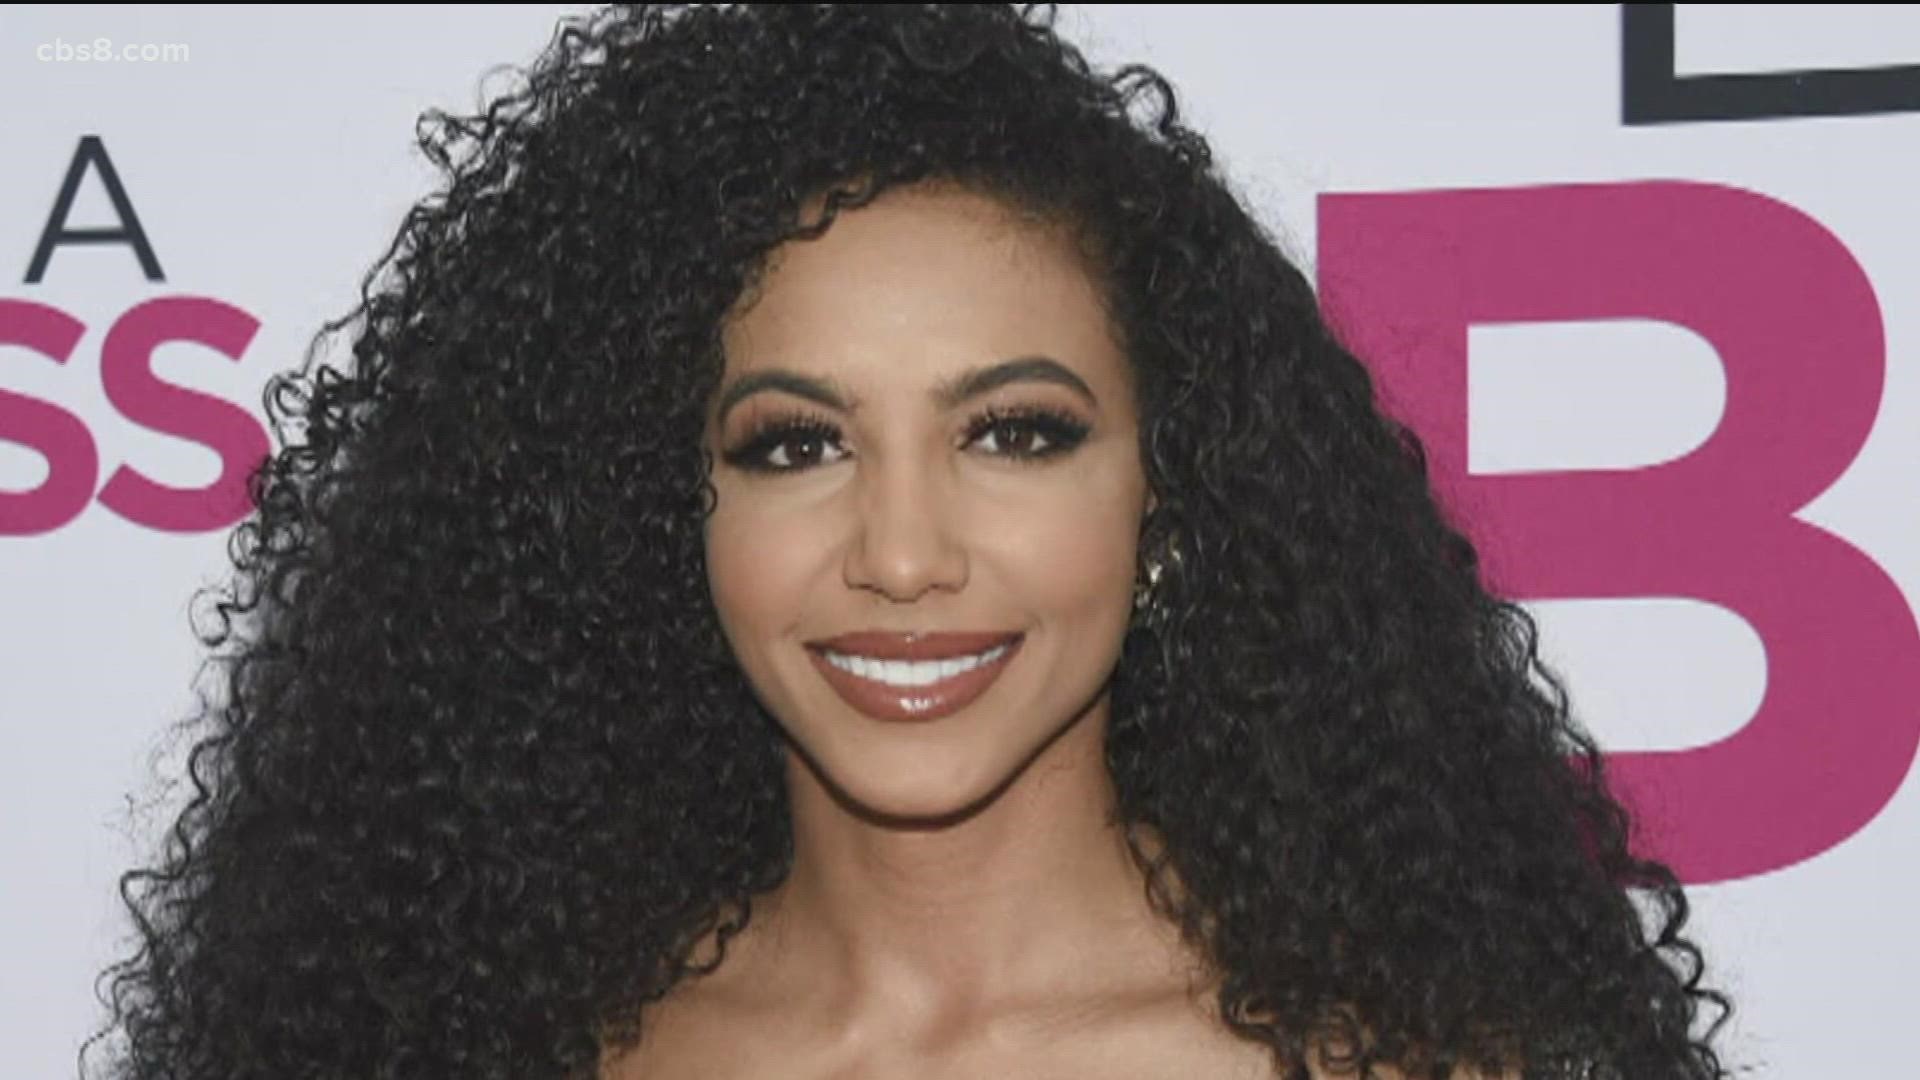 The death of former Miss USA Cheslie Kryst has been ruled a suicide. "We have to remember that everyone is human."